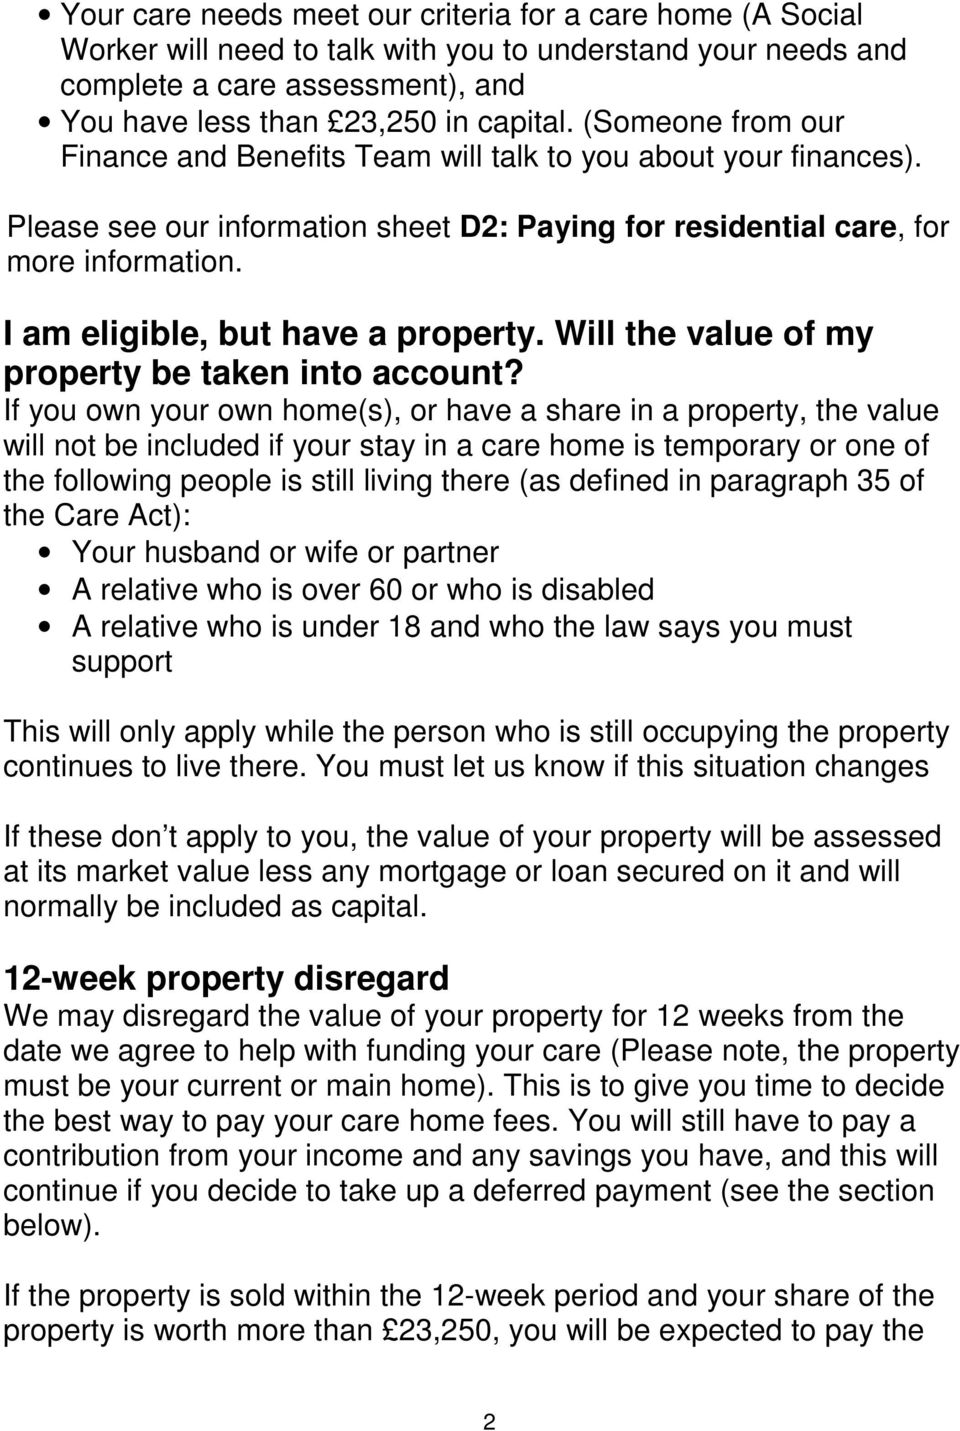 I am eligible, but have a property. Will the value of my property be taken into account?